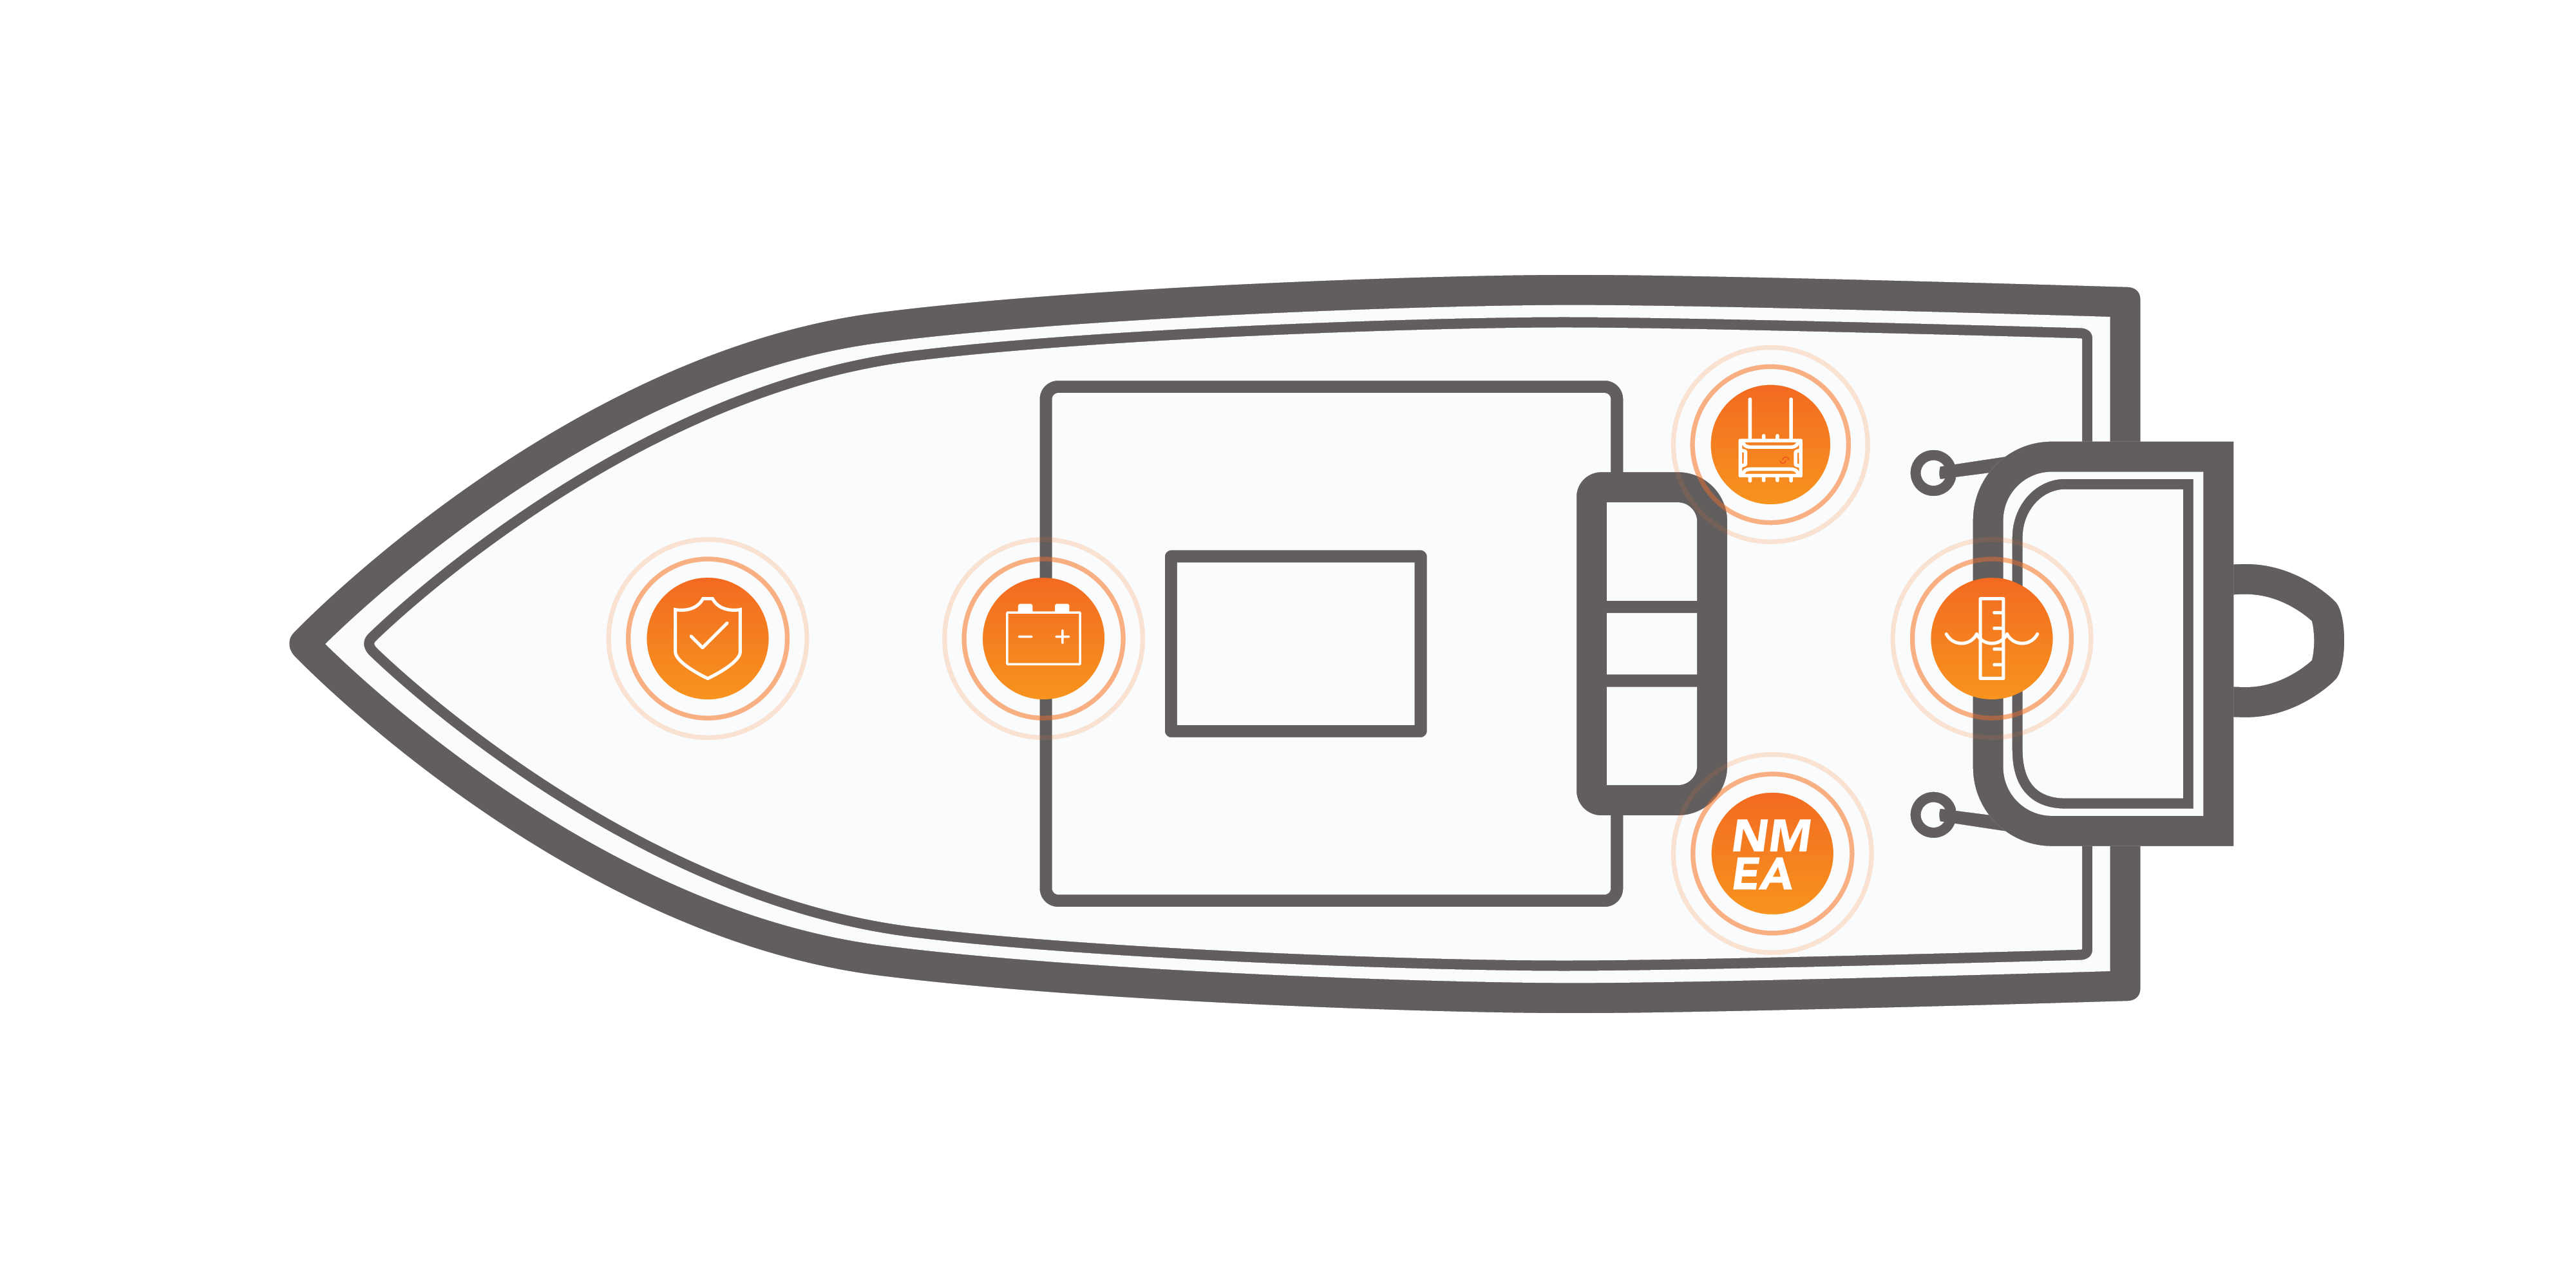 Saltwater Vessel under 30 foot - recommended Siren layout